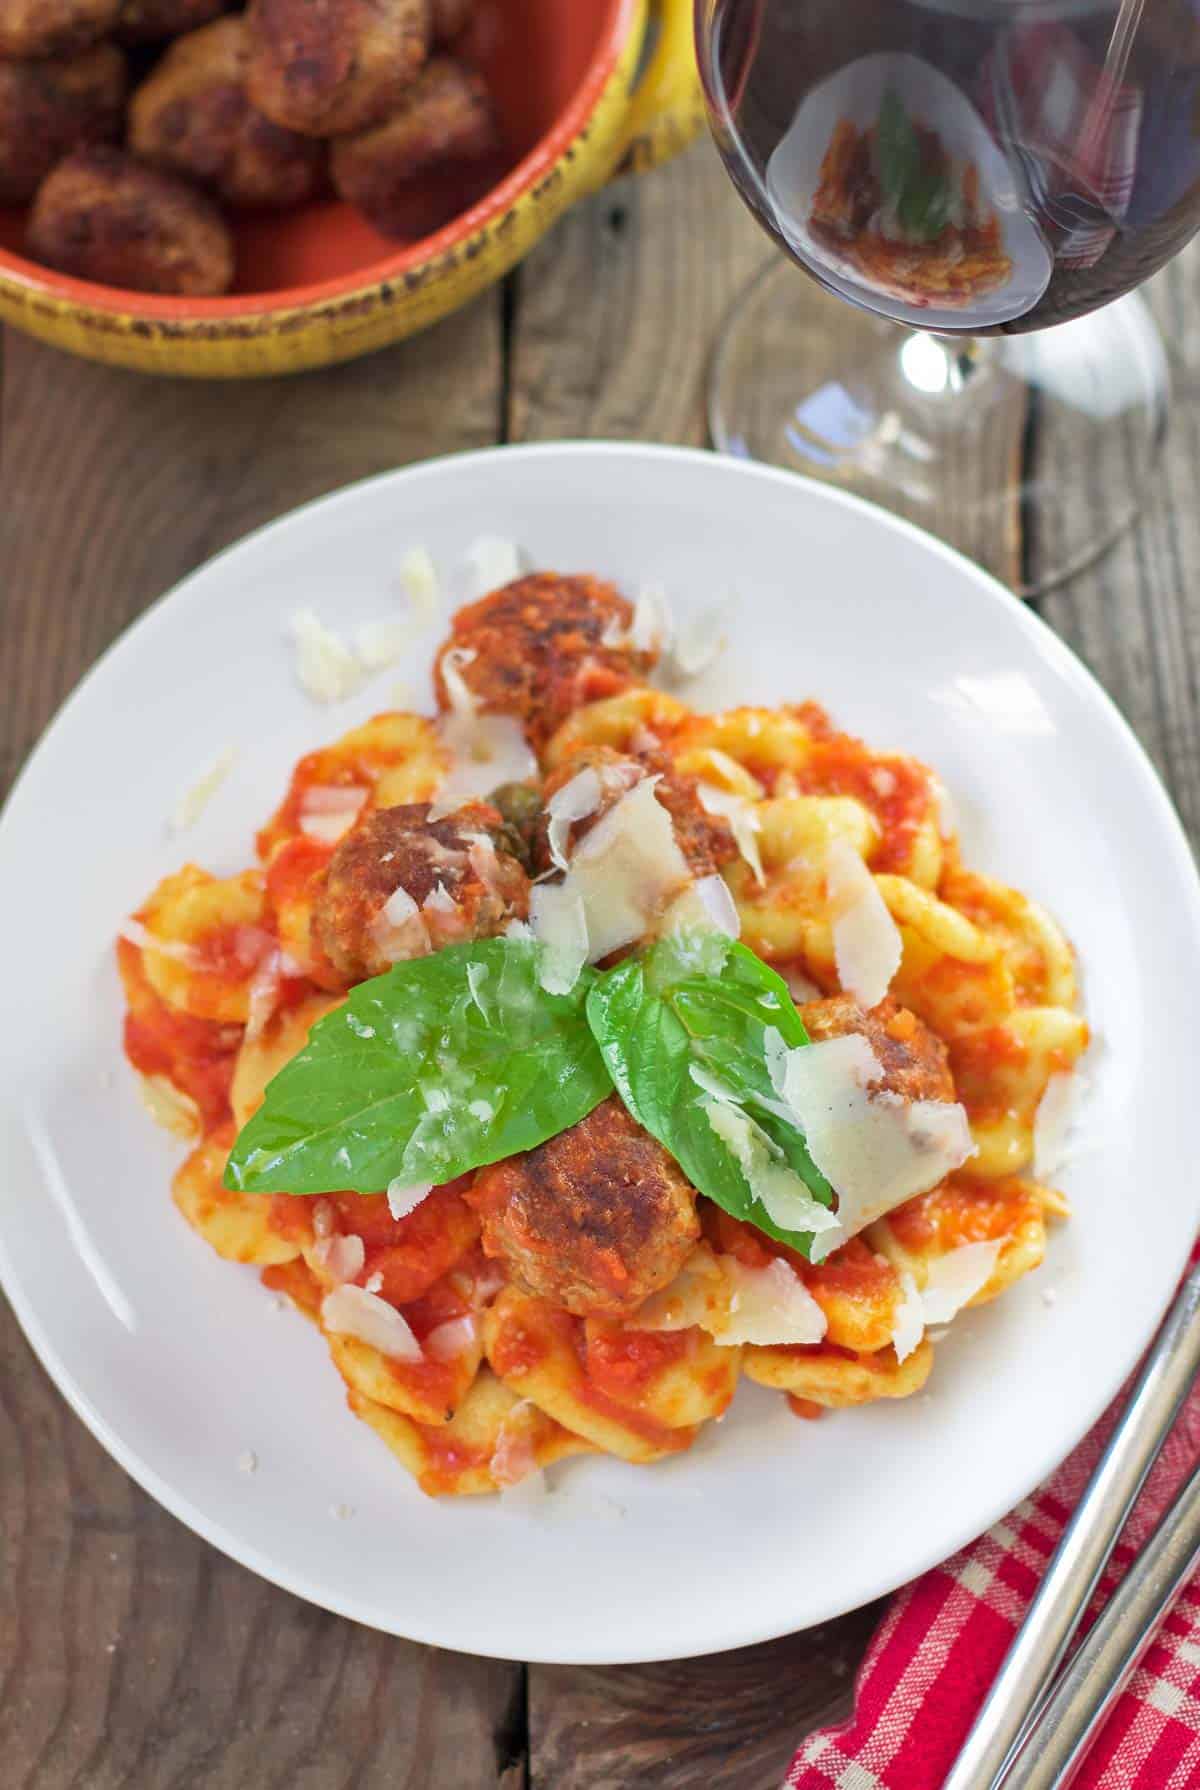 Homemade Orecchiette Pasta with meatballs and tomato sauce on a platter